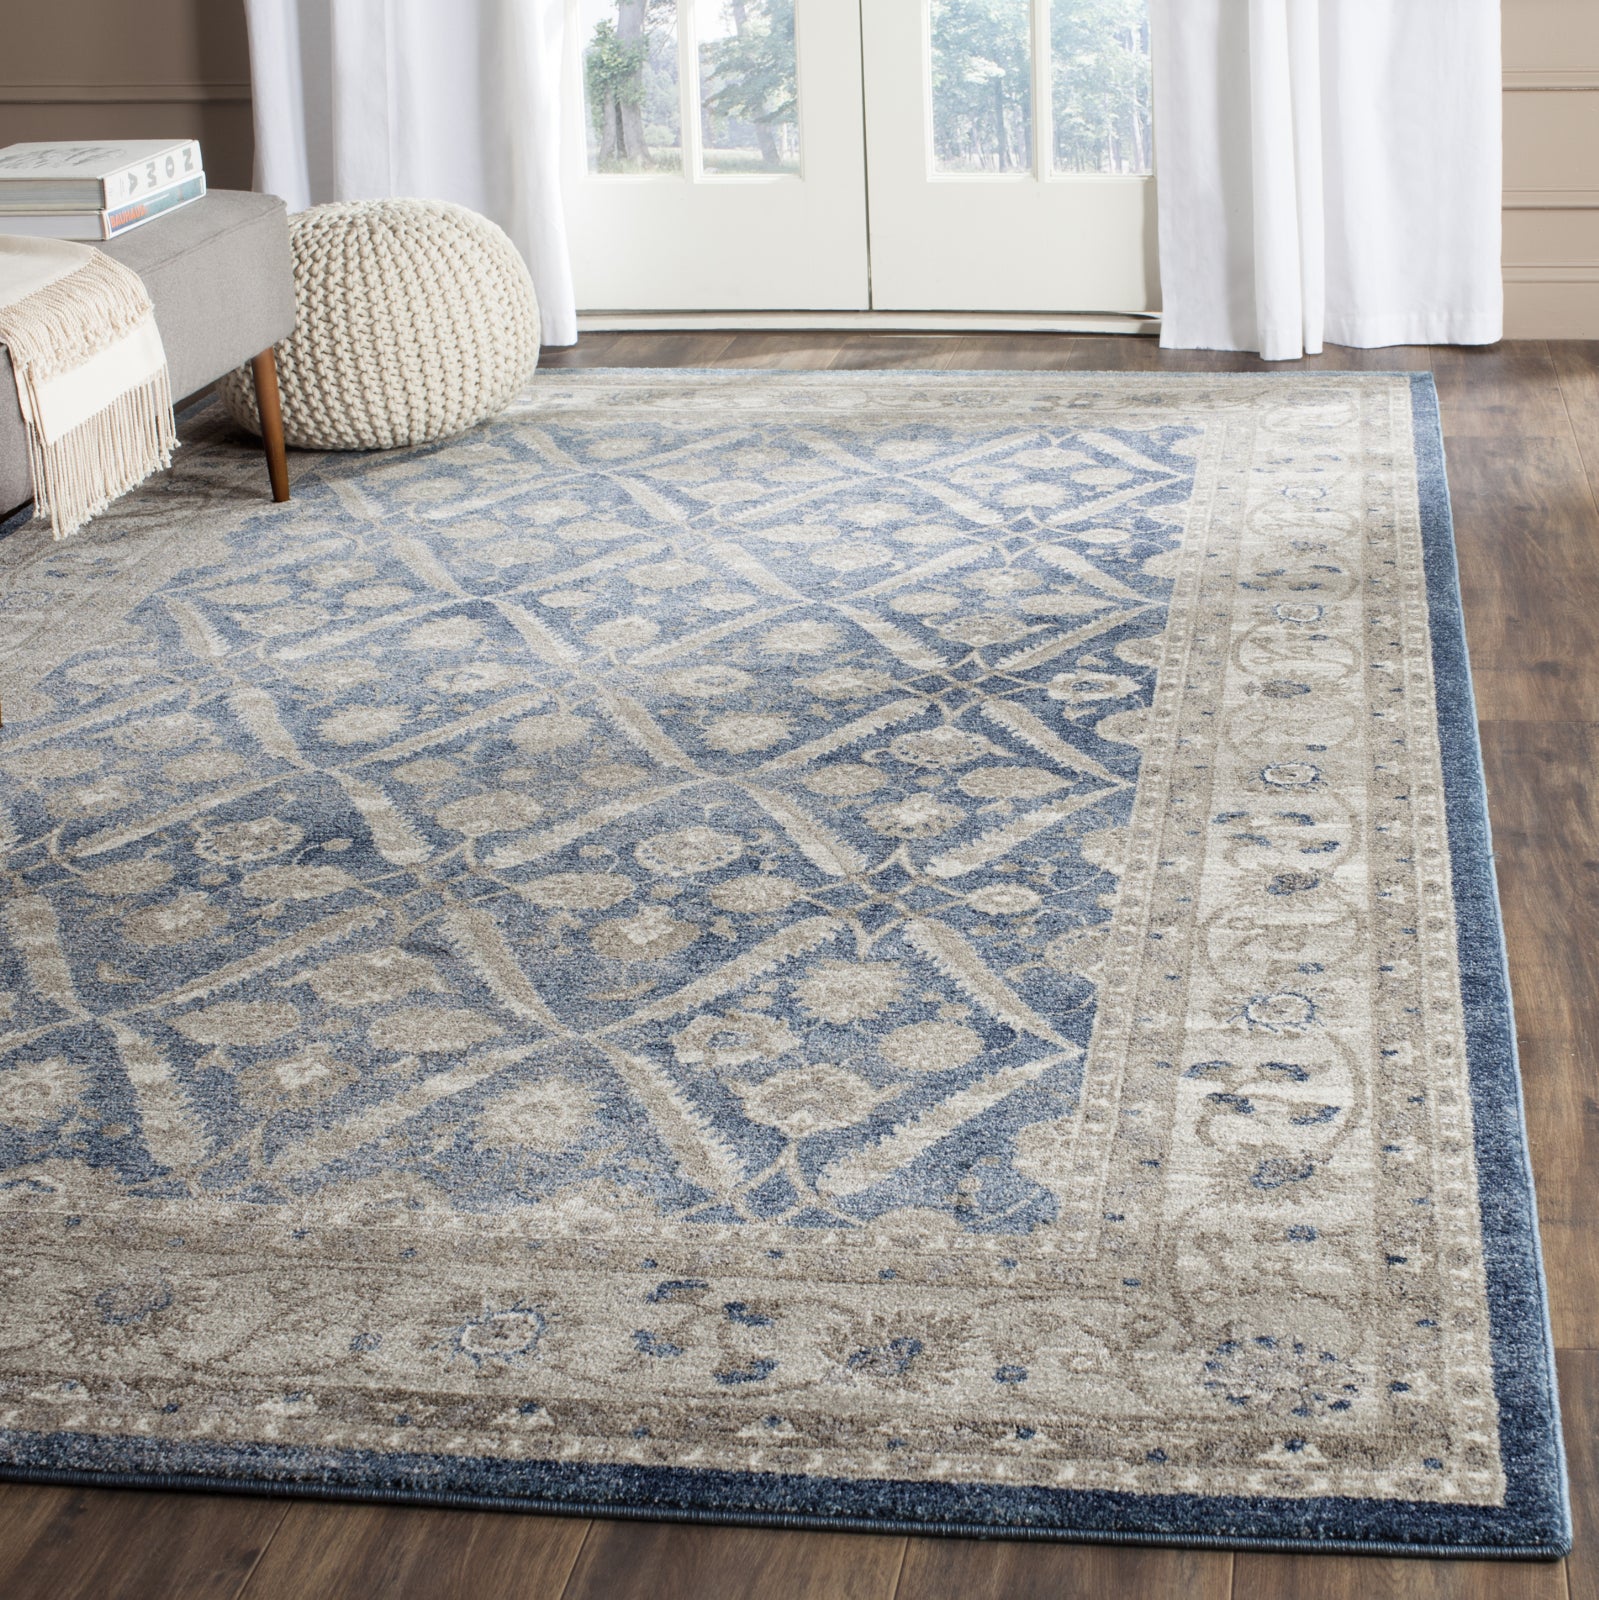 Buy Soft Navy Blue 5 X 7 Braided Area Rugs for Living Room ON SALE